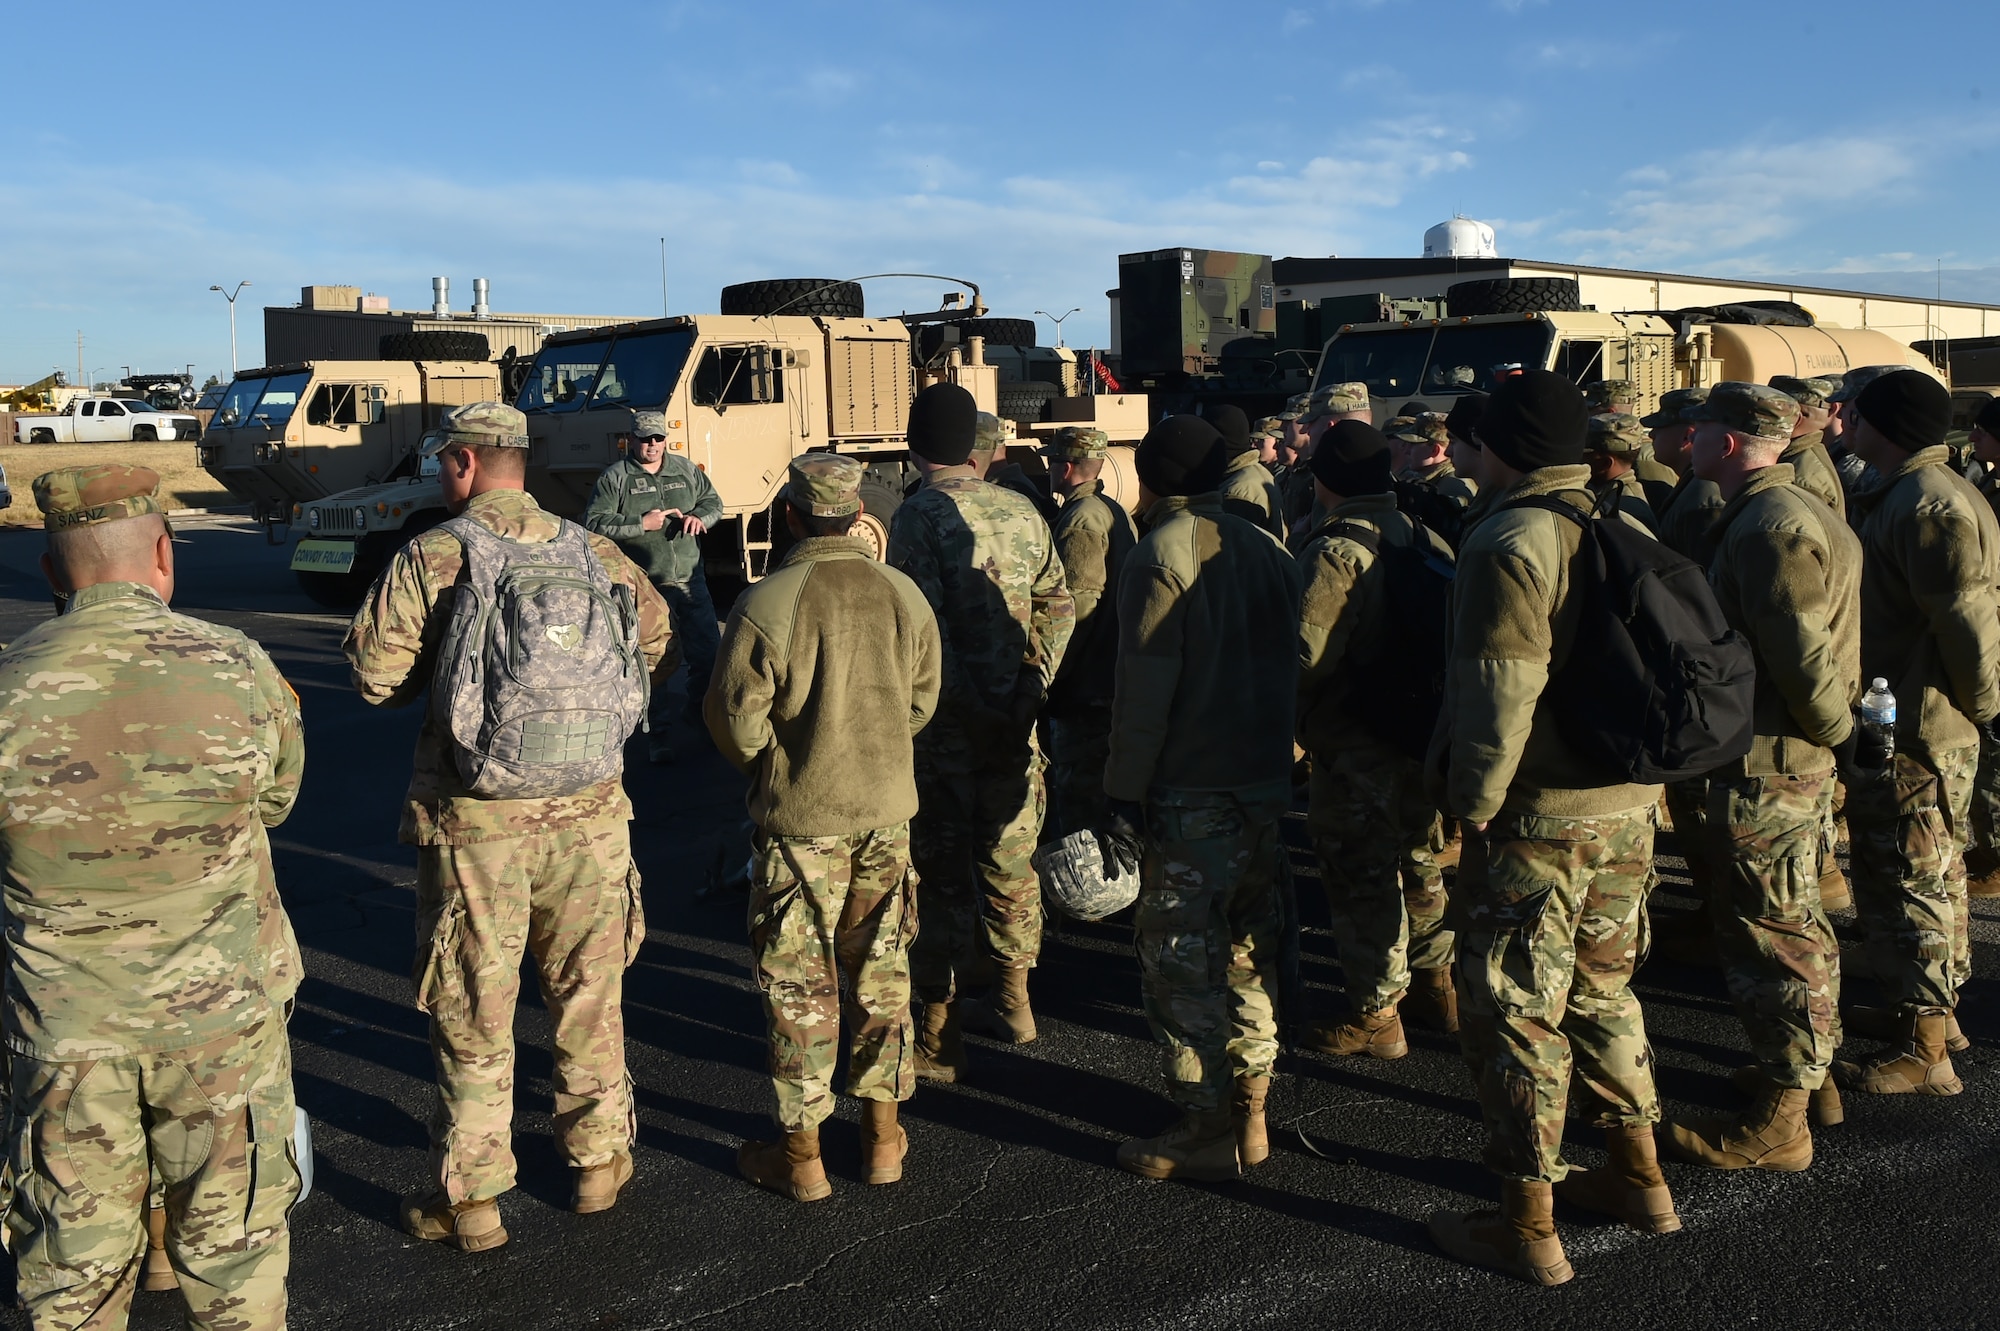 U.S. Air Force Master Sgt. Tracy Tinsley, the superintendent of air freight assigned to the 97th Logistics Readiness Squadron, talks to U.S. Army Soldiers assigned to the 4th Battalion, 3rd Air Defense Artillery Regiment about the plans for a joint exercise,